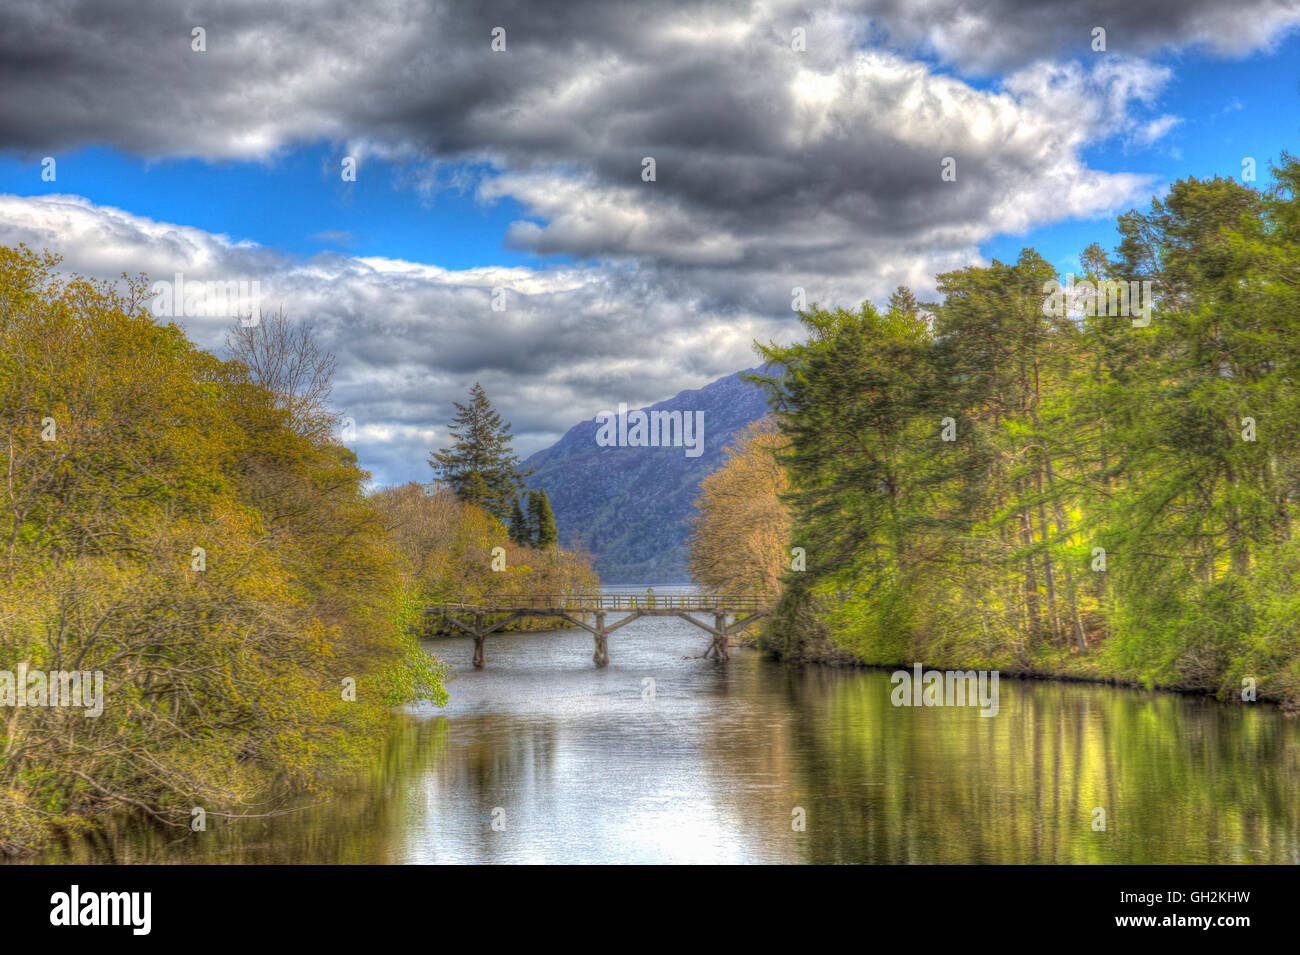 Fort Augustus Scotland UK River Oich in Scottish Highlands popular tourist village by Loch Ness in colourful HDR with bridge Stock Photo